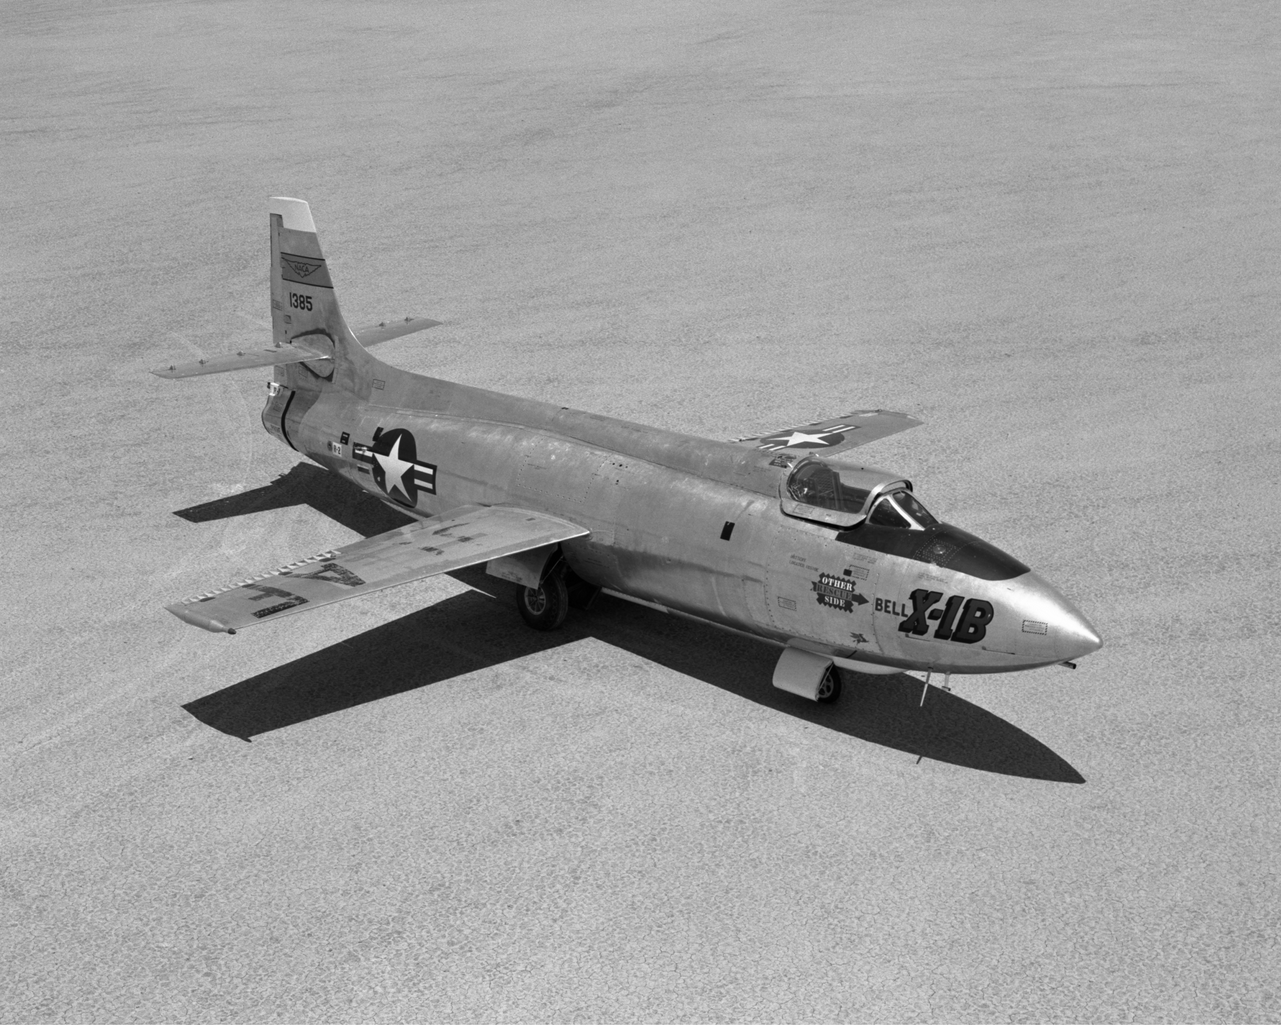 Bell X-1B 46-1385 parked on Rogers Dry Lake, 30 July 1958. (NASA)